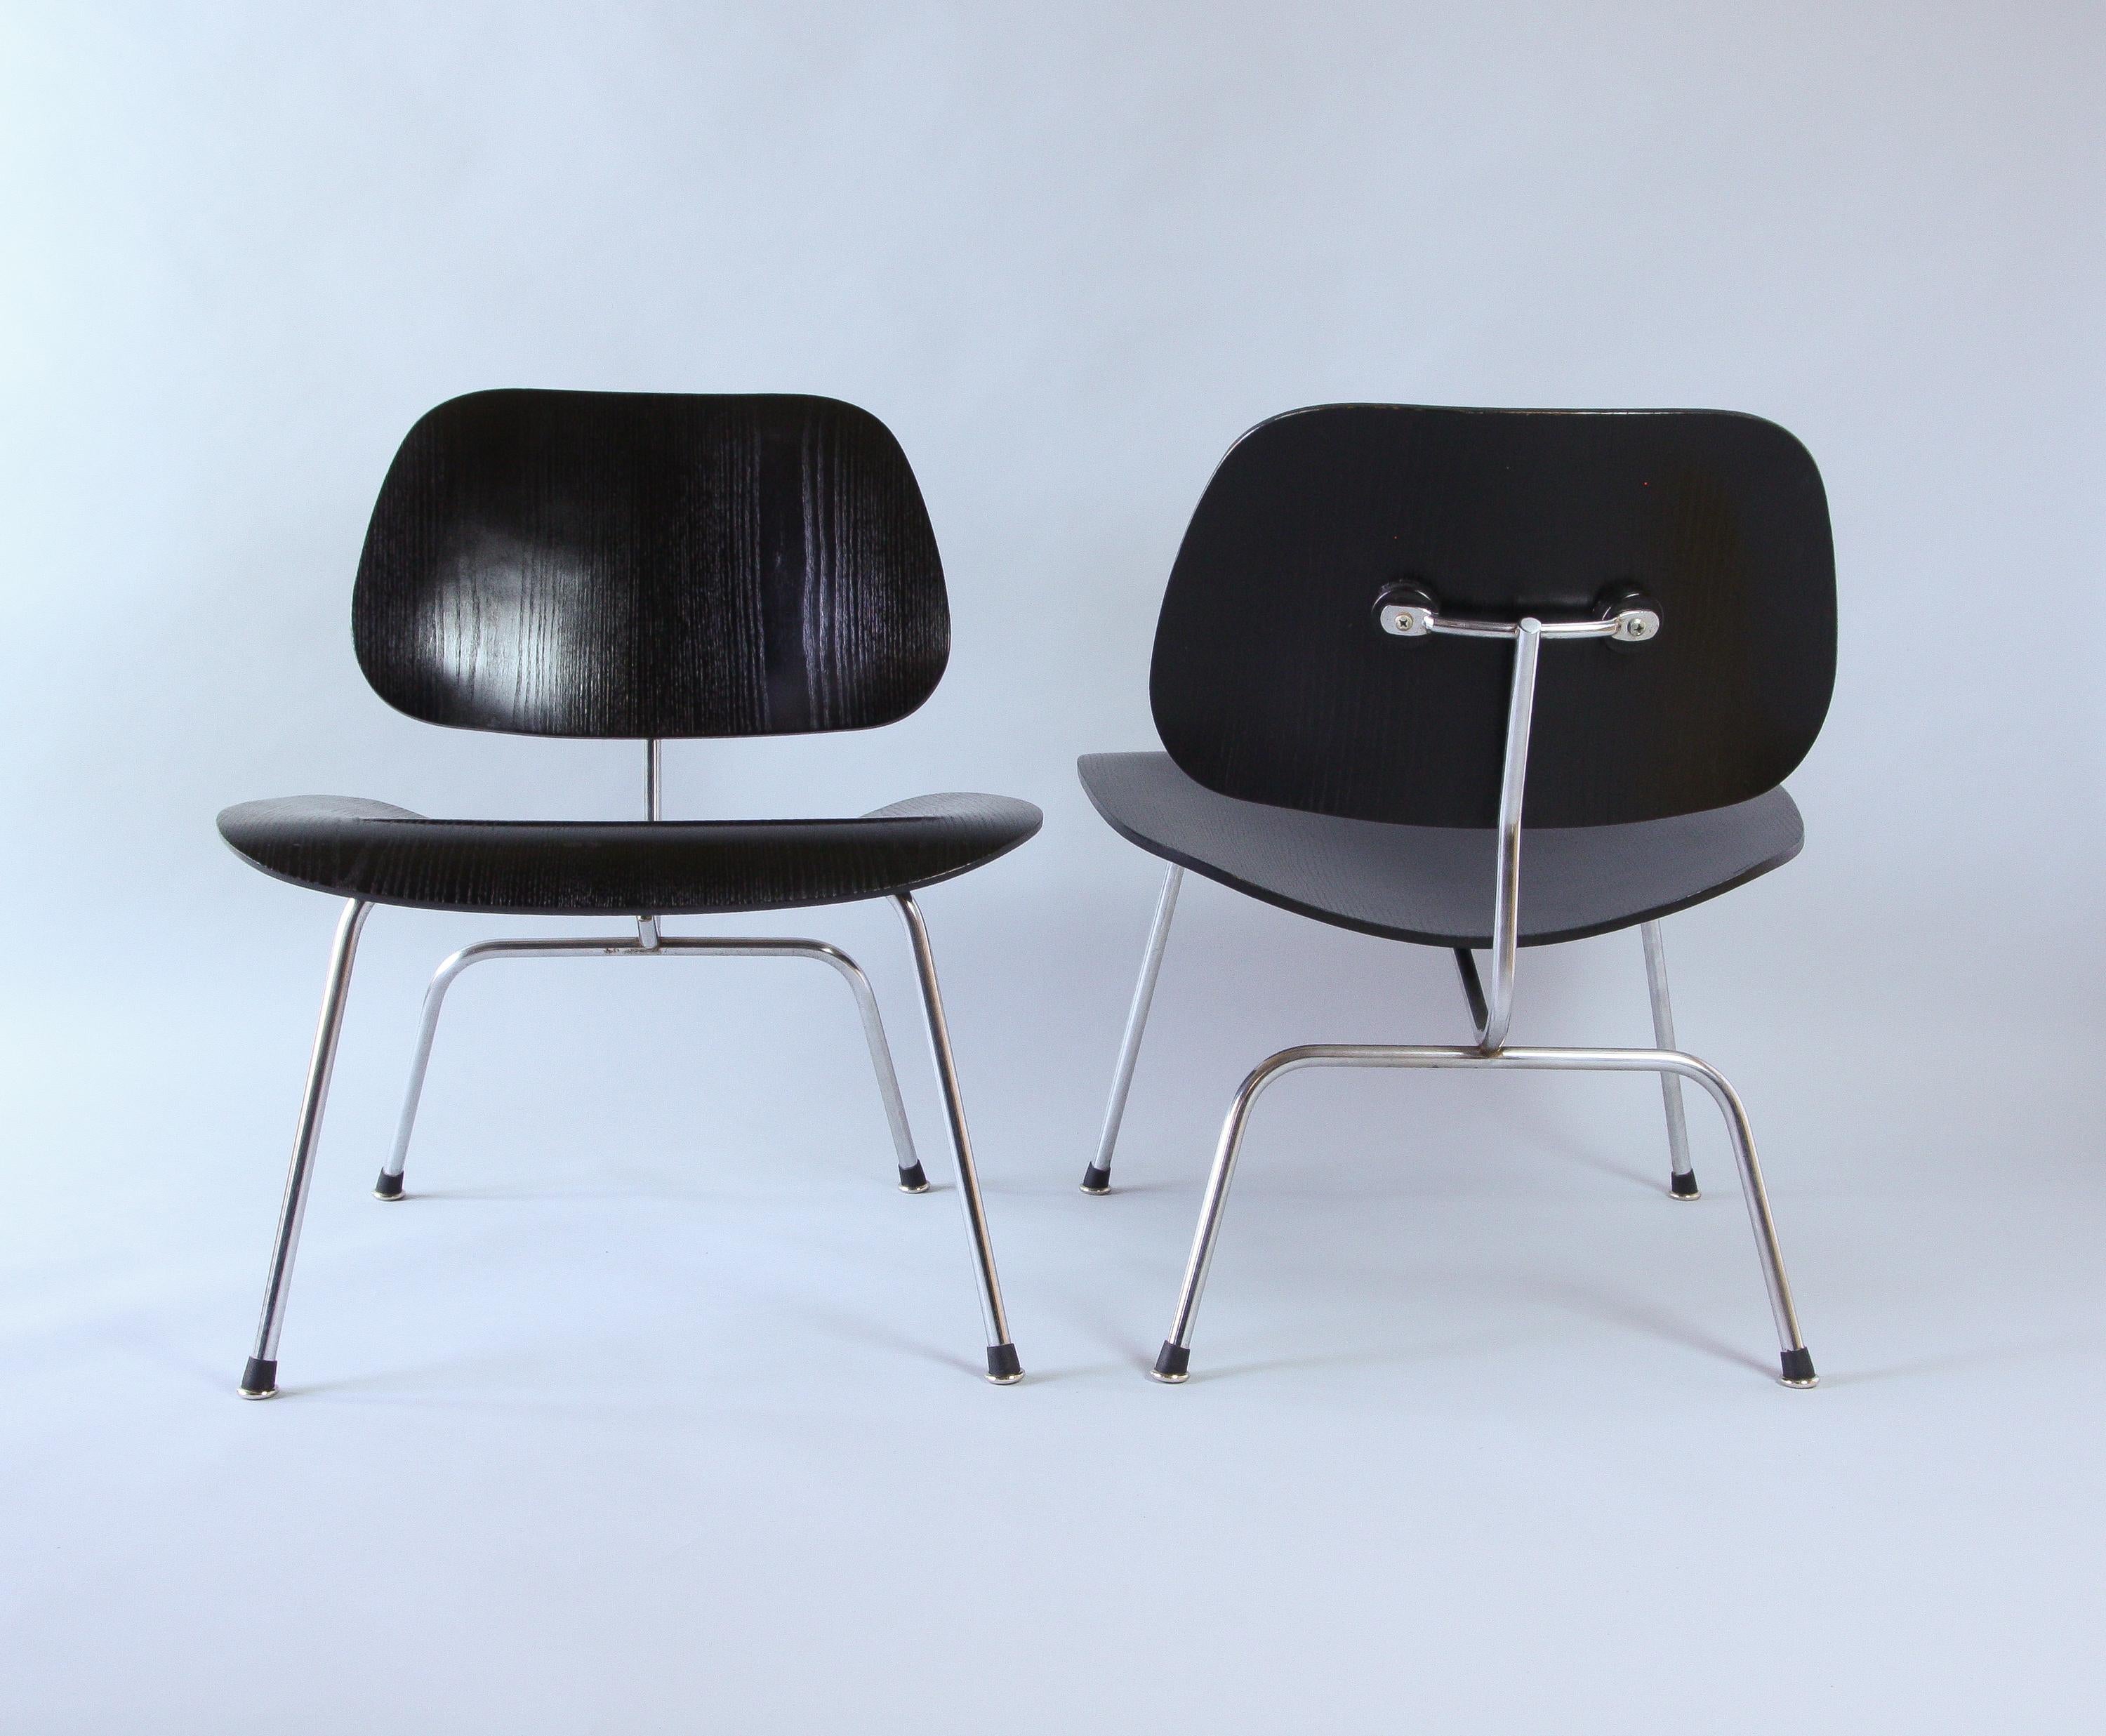 Two Eames LCM chairs in black and chrome, circa 1958. Great vintage condition showing age to the chrome with wear and scratching to the wood. Featuring the earlier style of angled rubber boot glides, these have been newly added.
In 1957 Wily